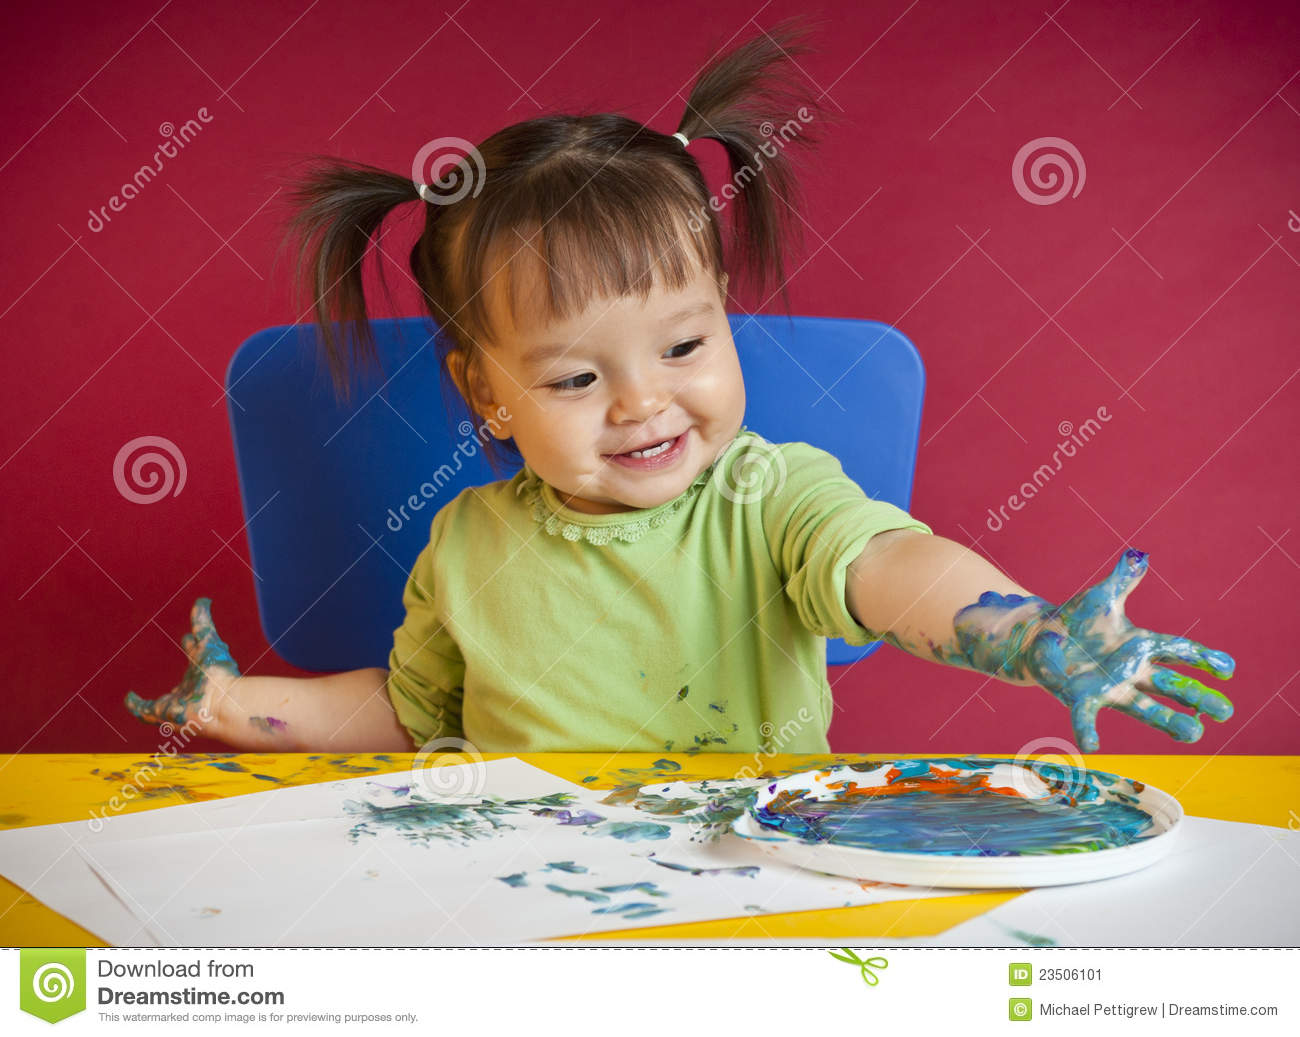 Toddler Finger Painting Stock Image   Image  23506101